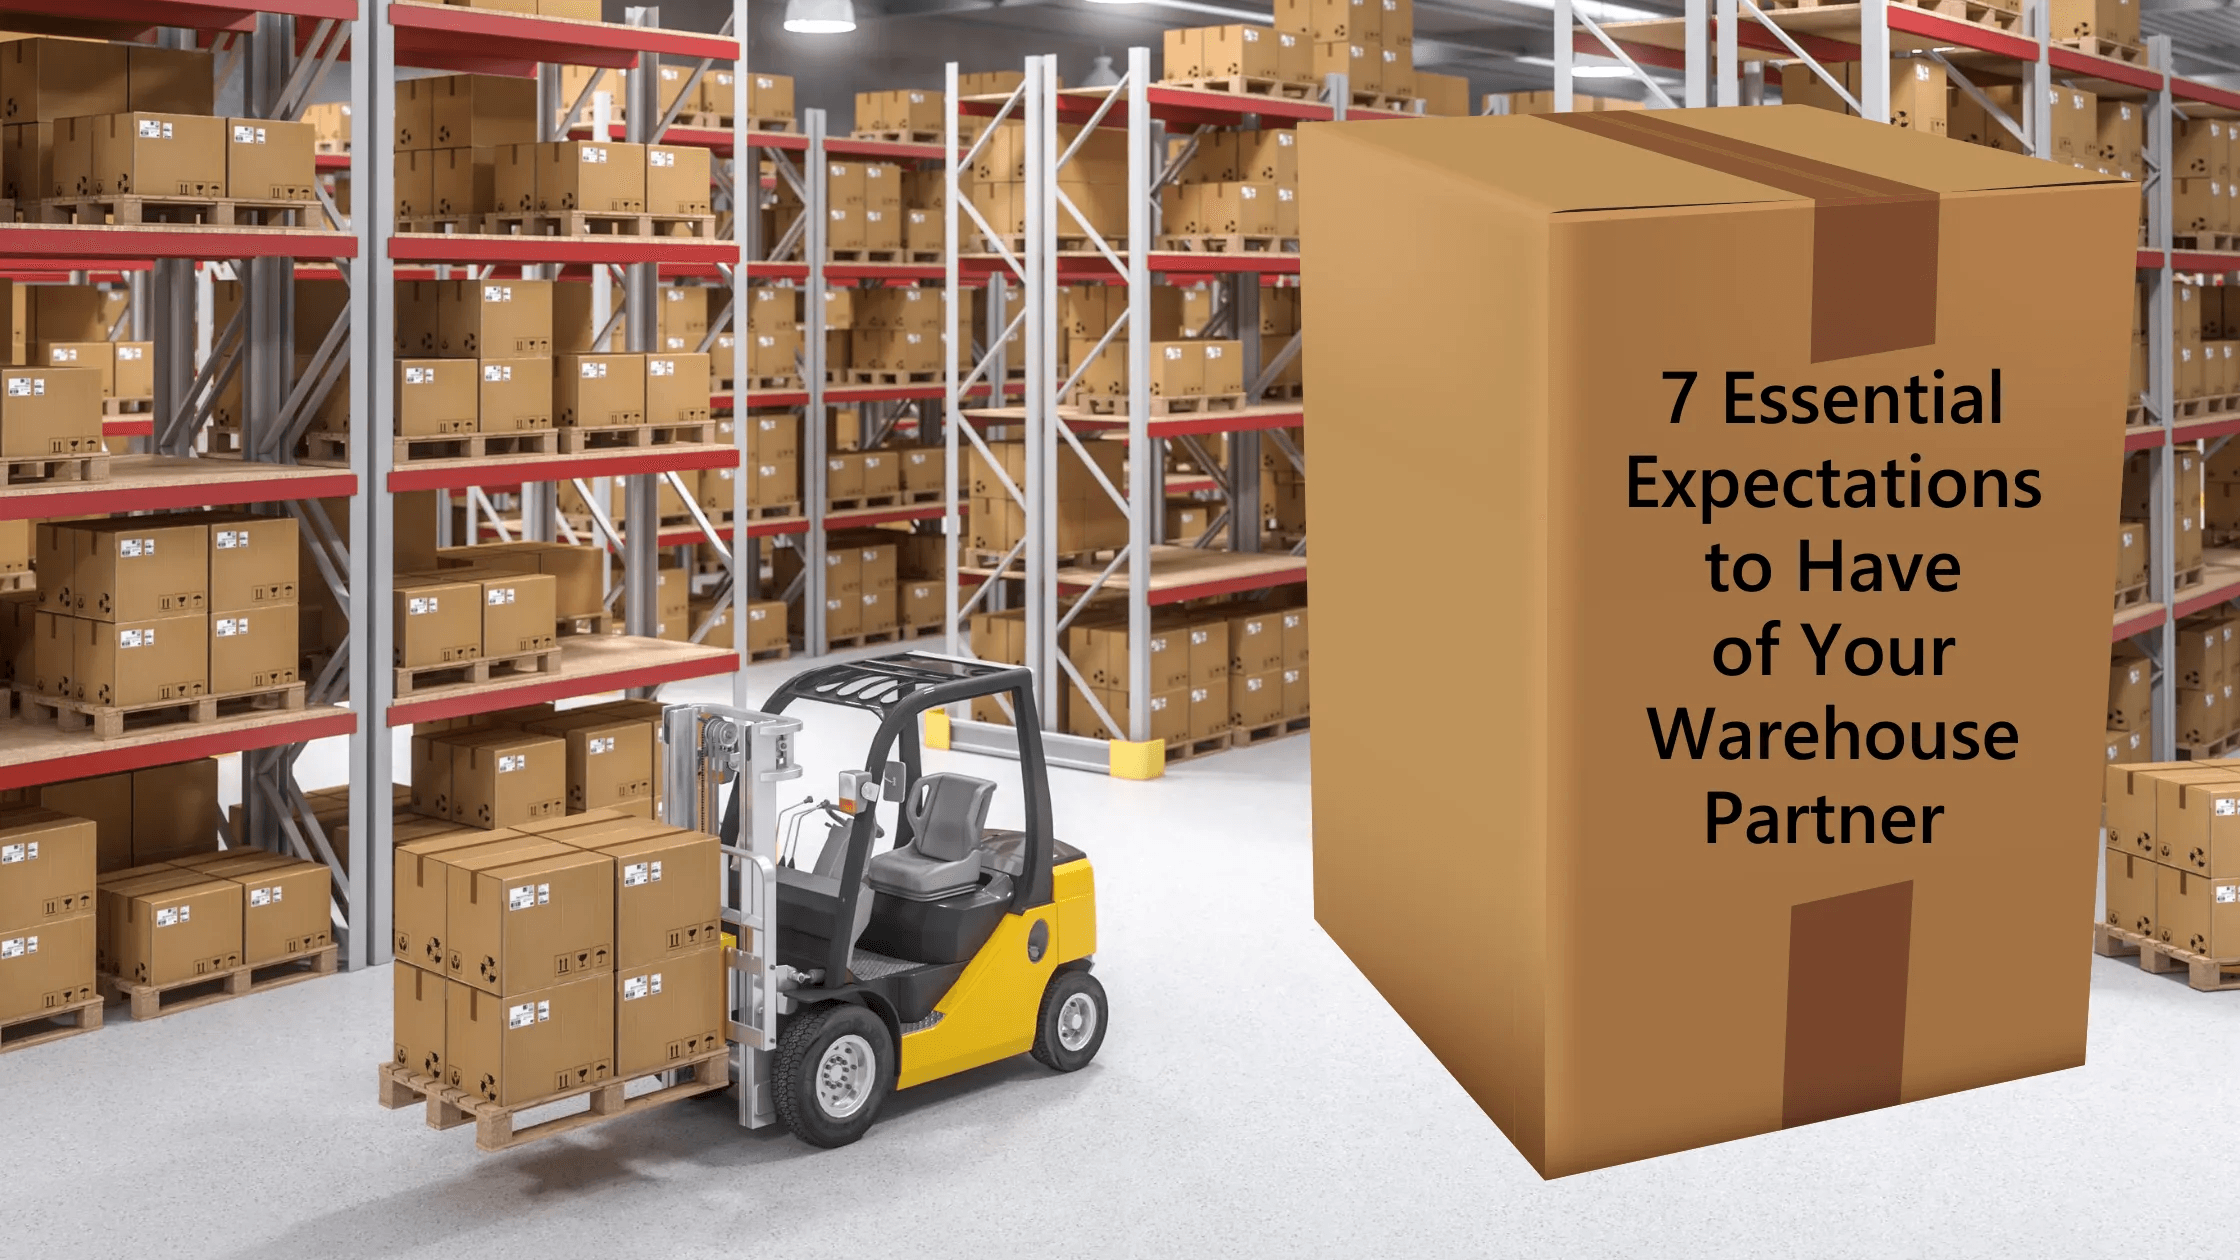 7 essential expectations to have of your warehouse center text on a box within a warehouse facility